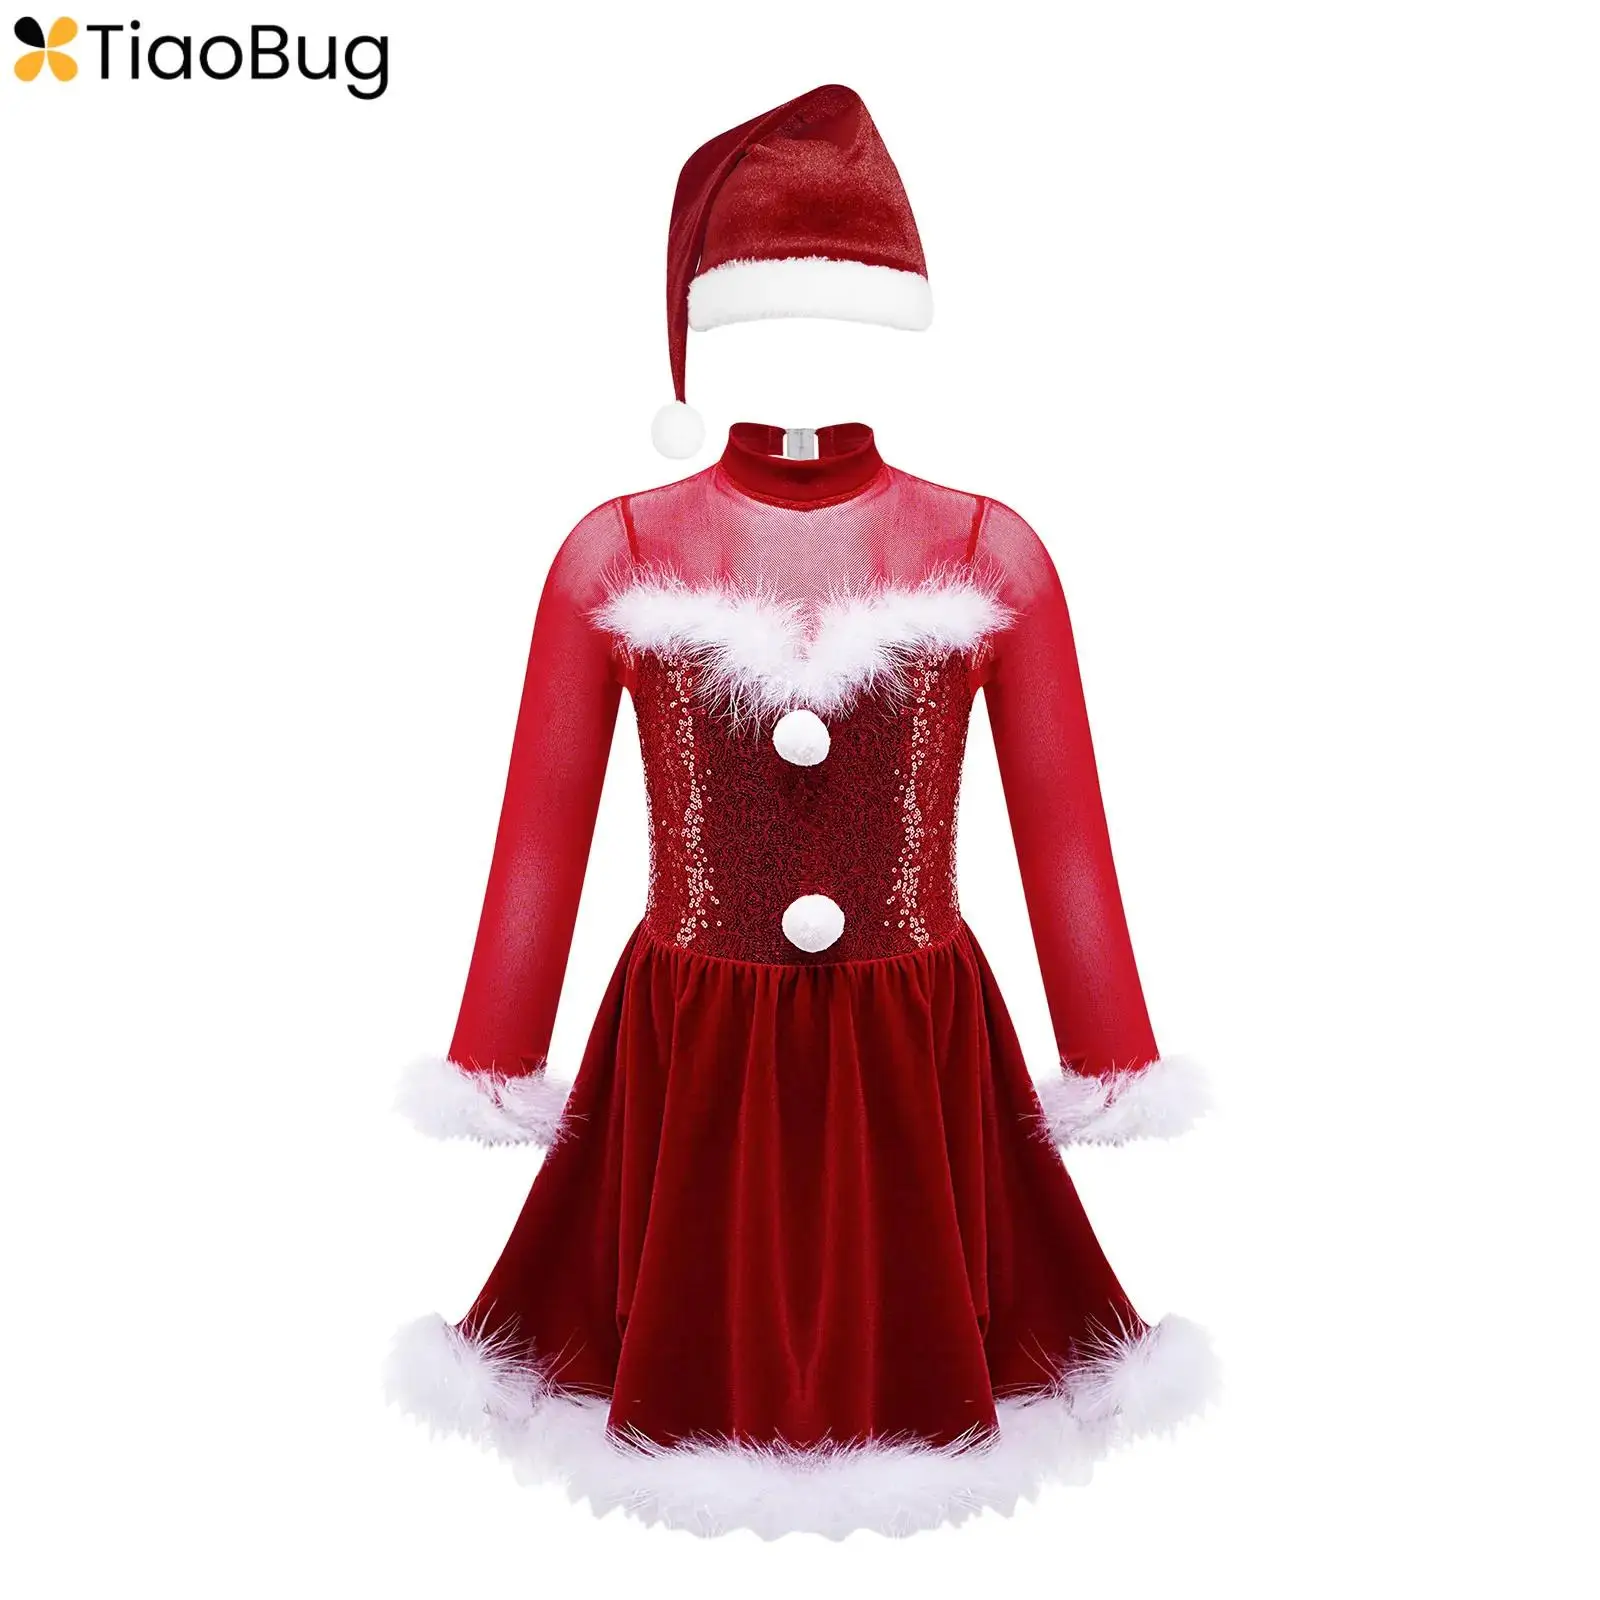 

Kids Girls Christmas Mrs Santa Claus Costume Long Sleeve Ballet Dance Skating Tutu Dress with Hat Xmas Party Candy Cane Cosplay